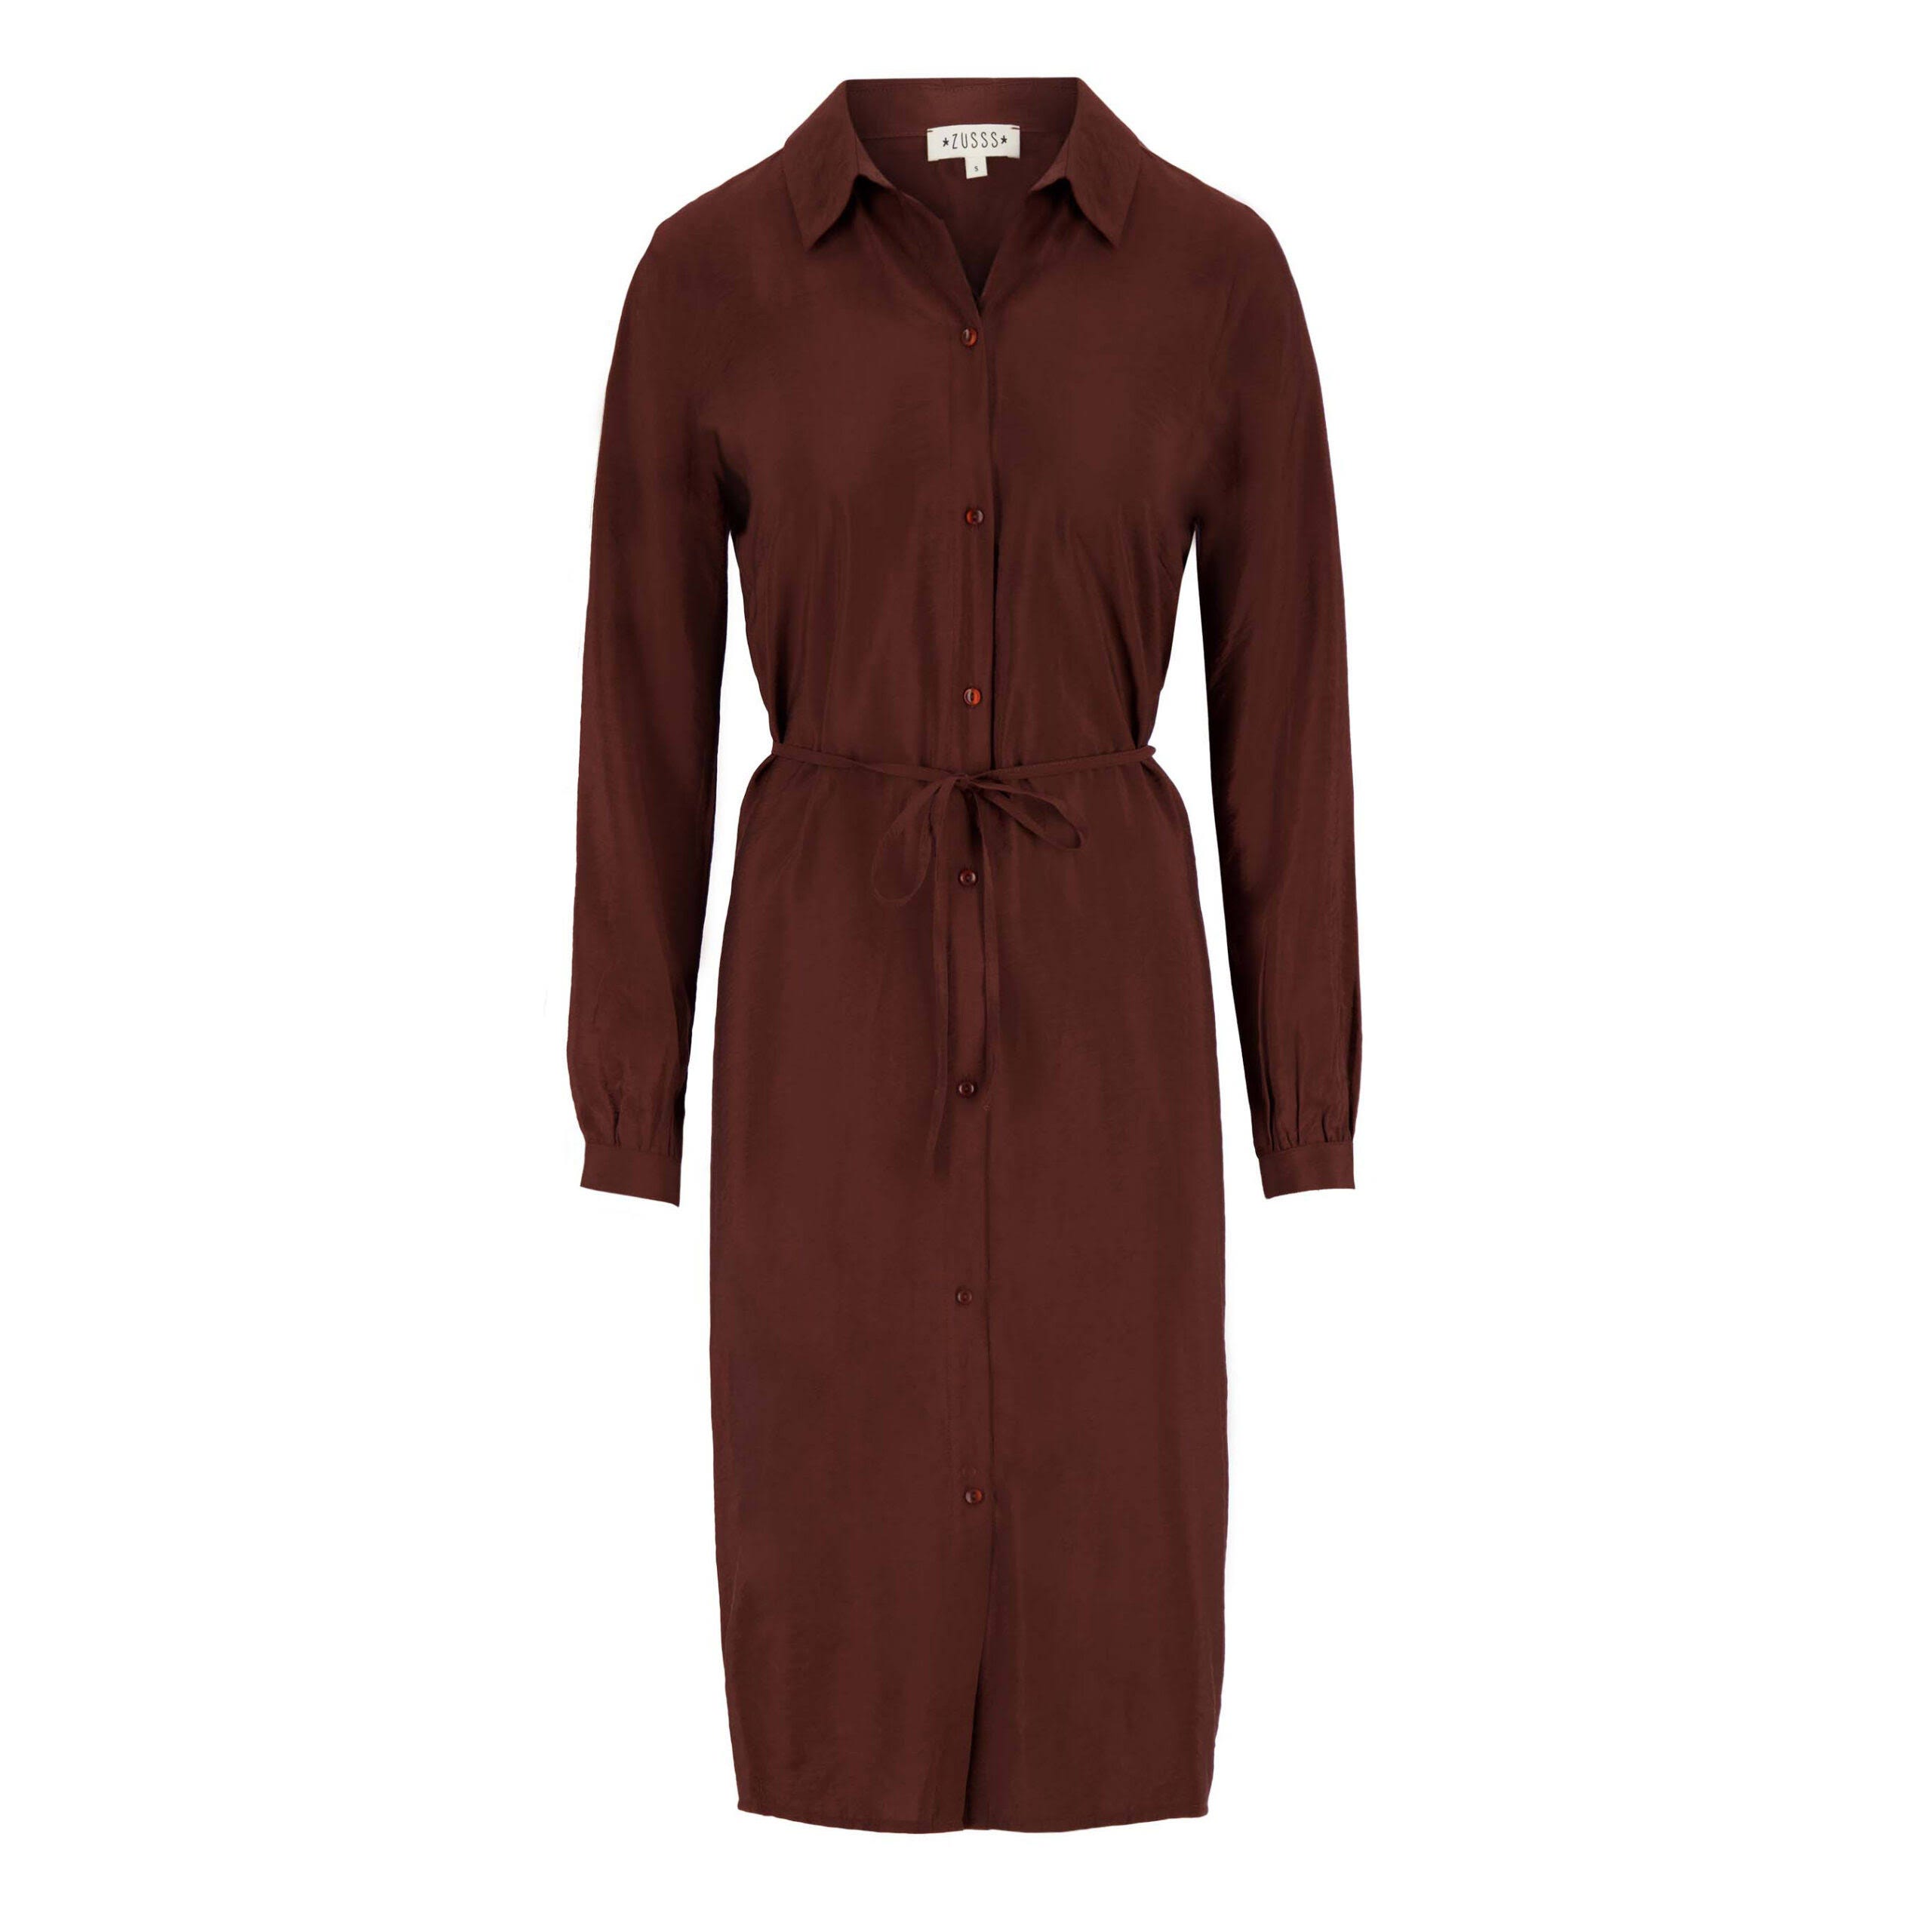 Chic Chocolate Brown Shirt Dress for Fall | Image